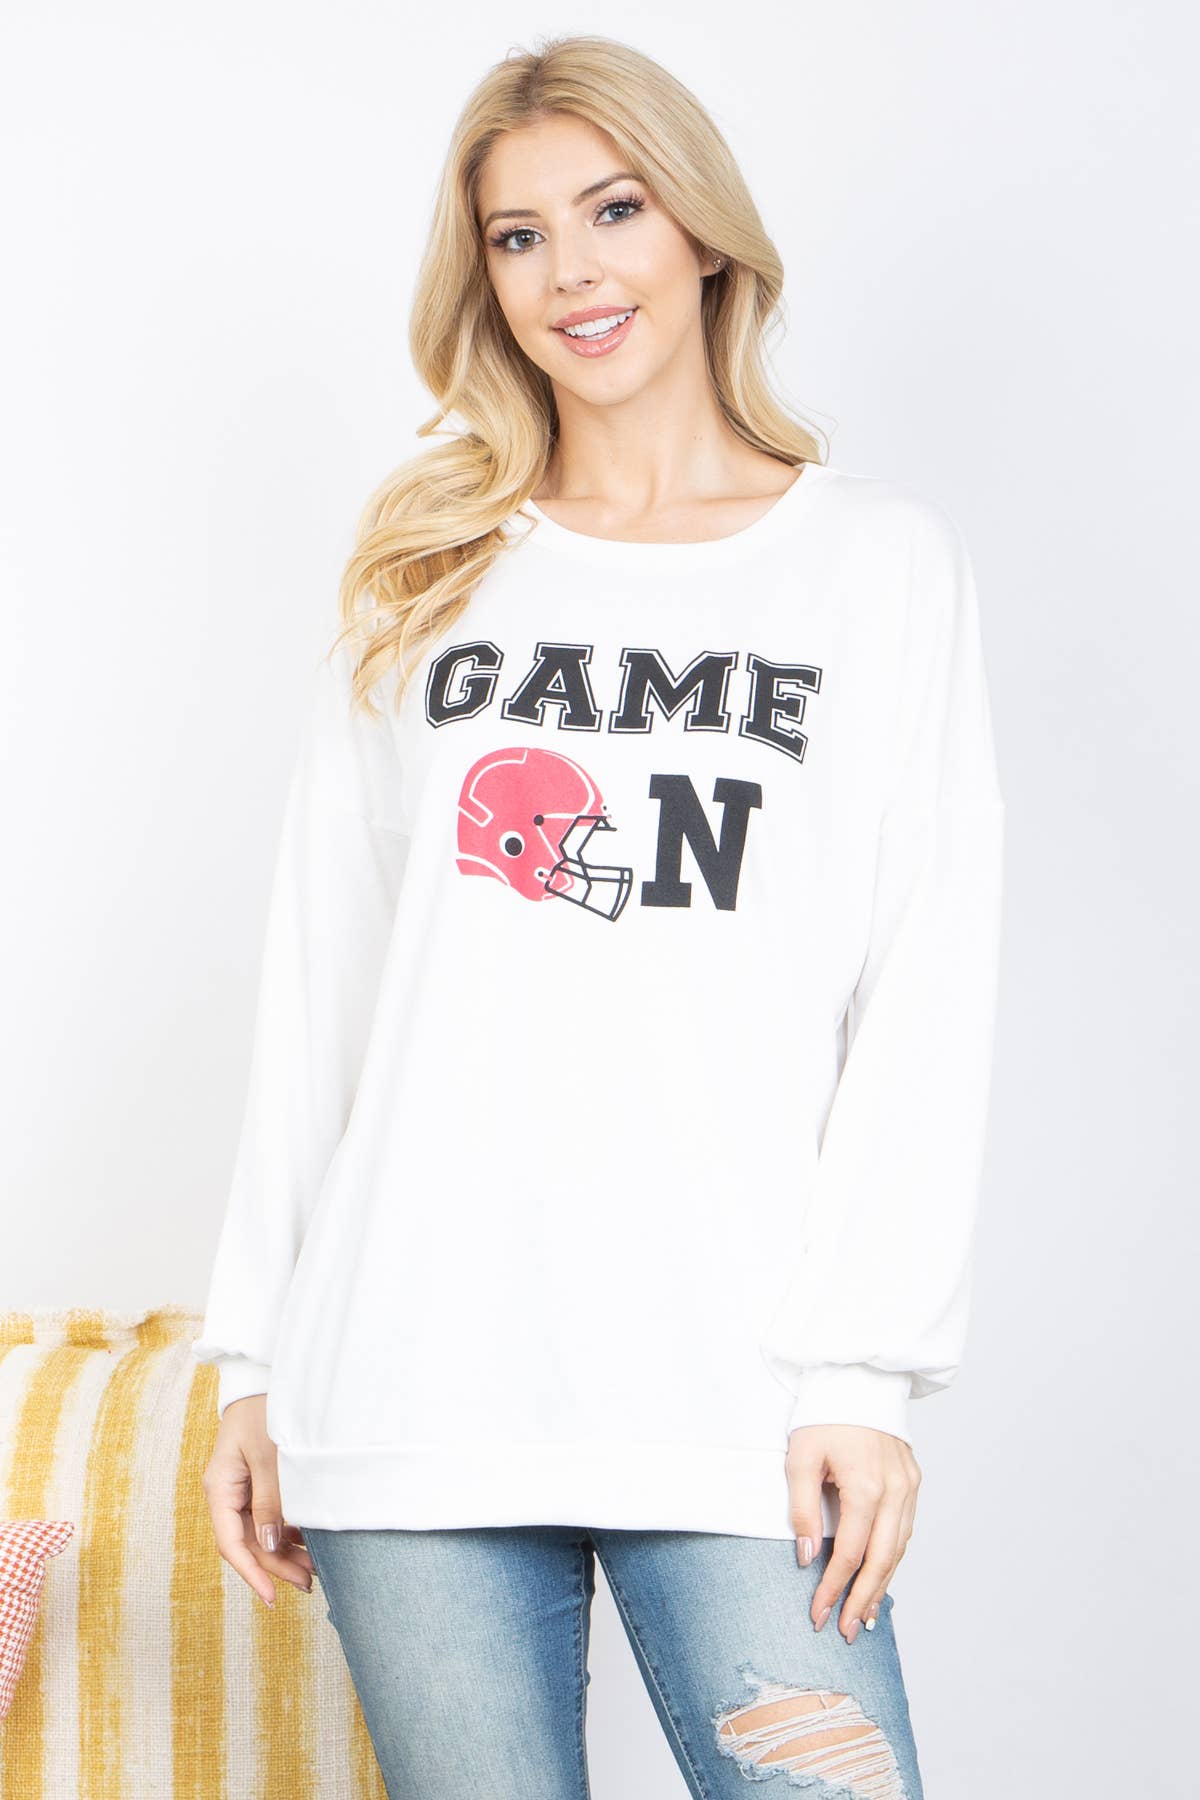 Perfect Peach - PPT21198-"GAME ON" PRINTED ROUND NECK PULLOVER TOP - L / BLACK